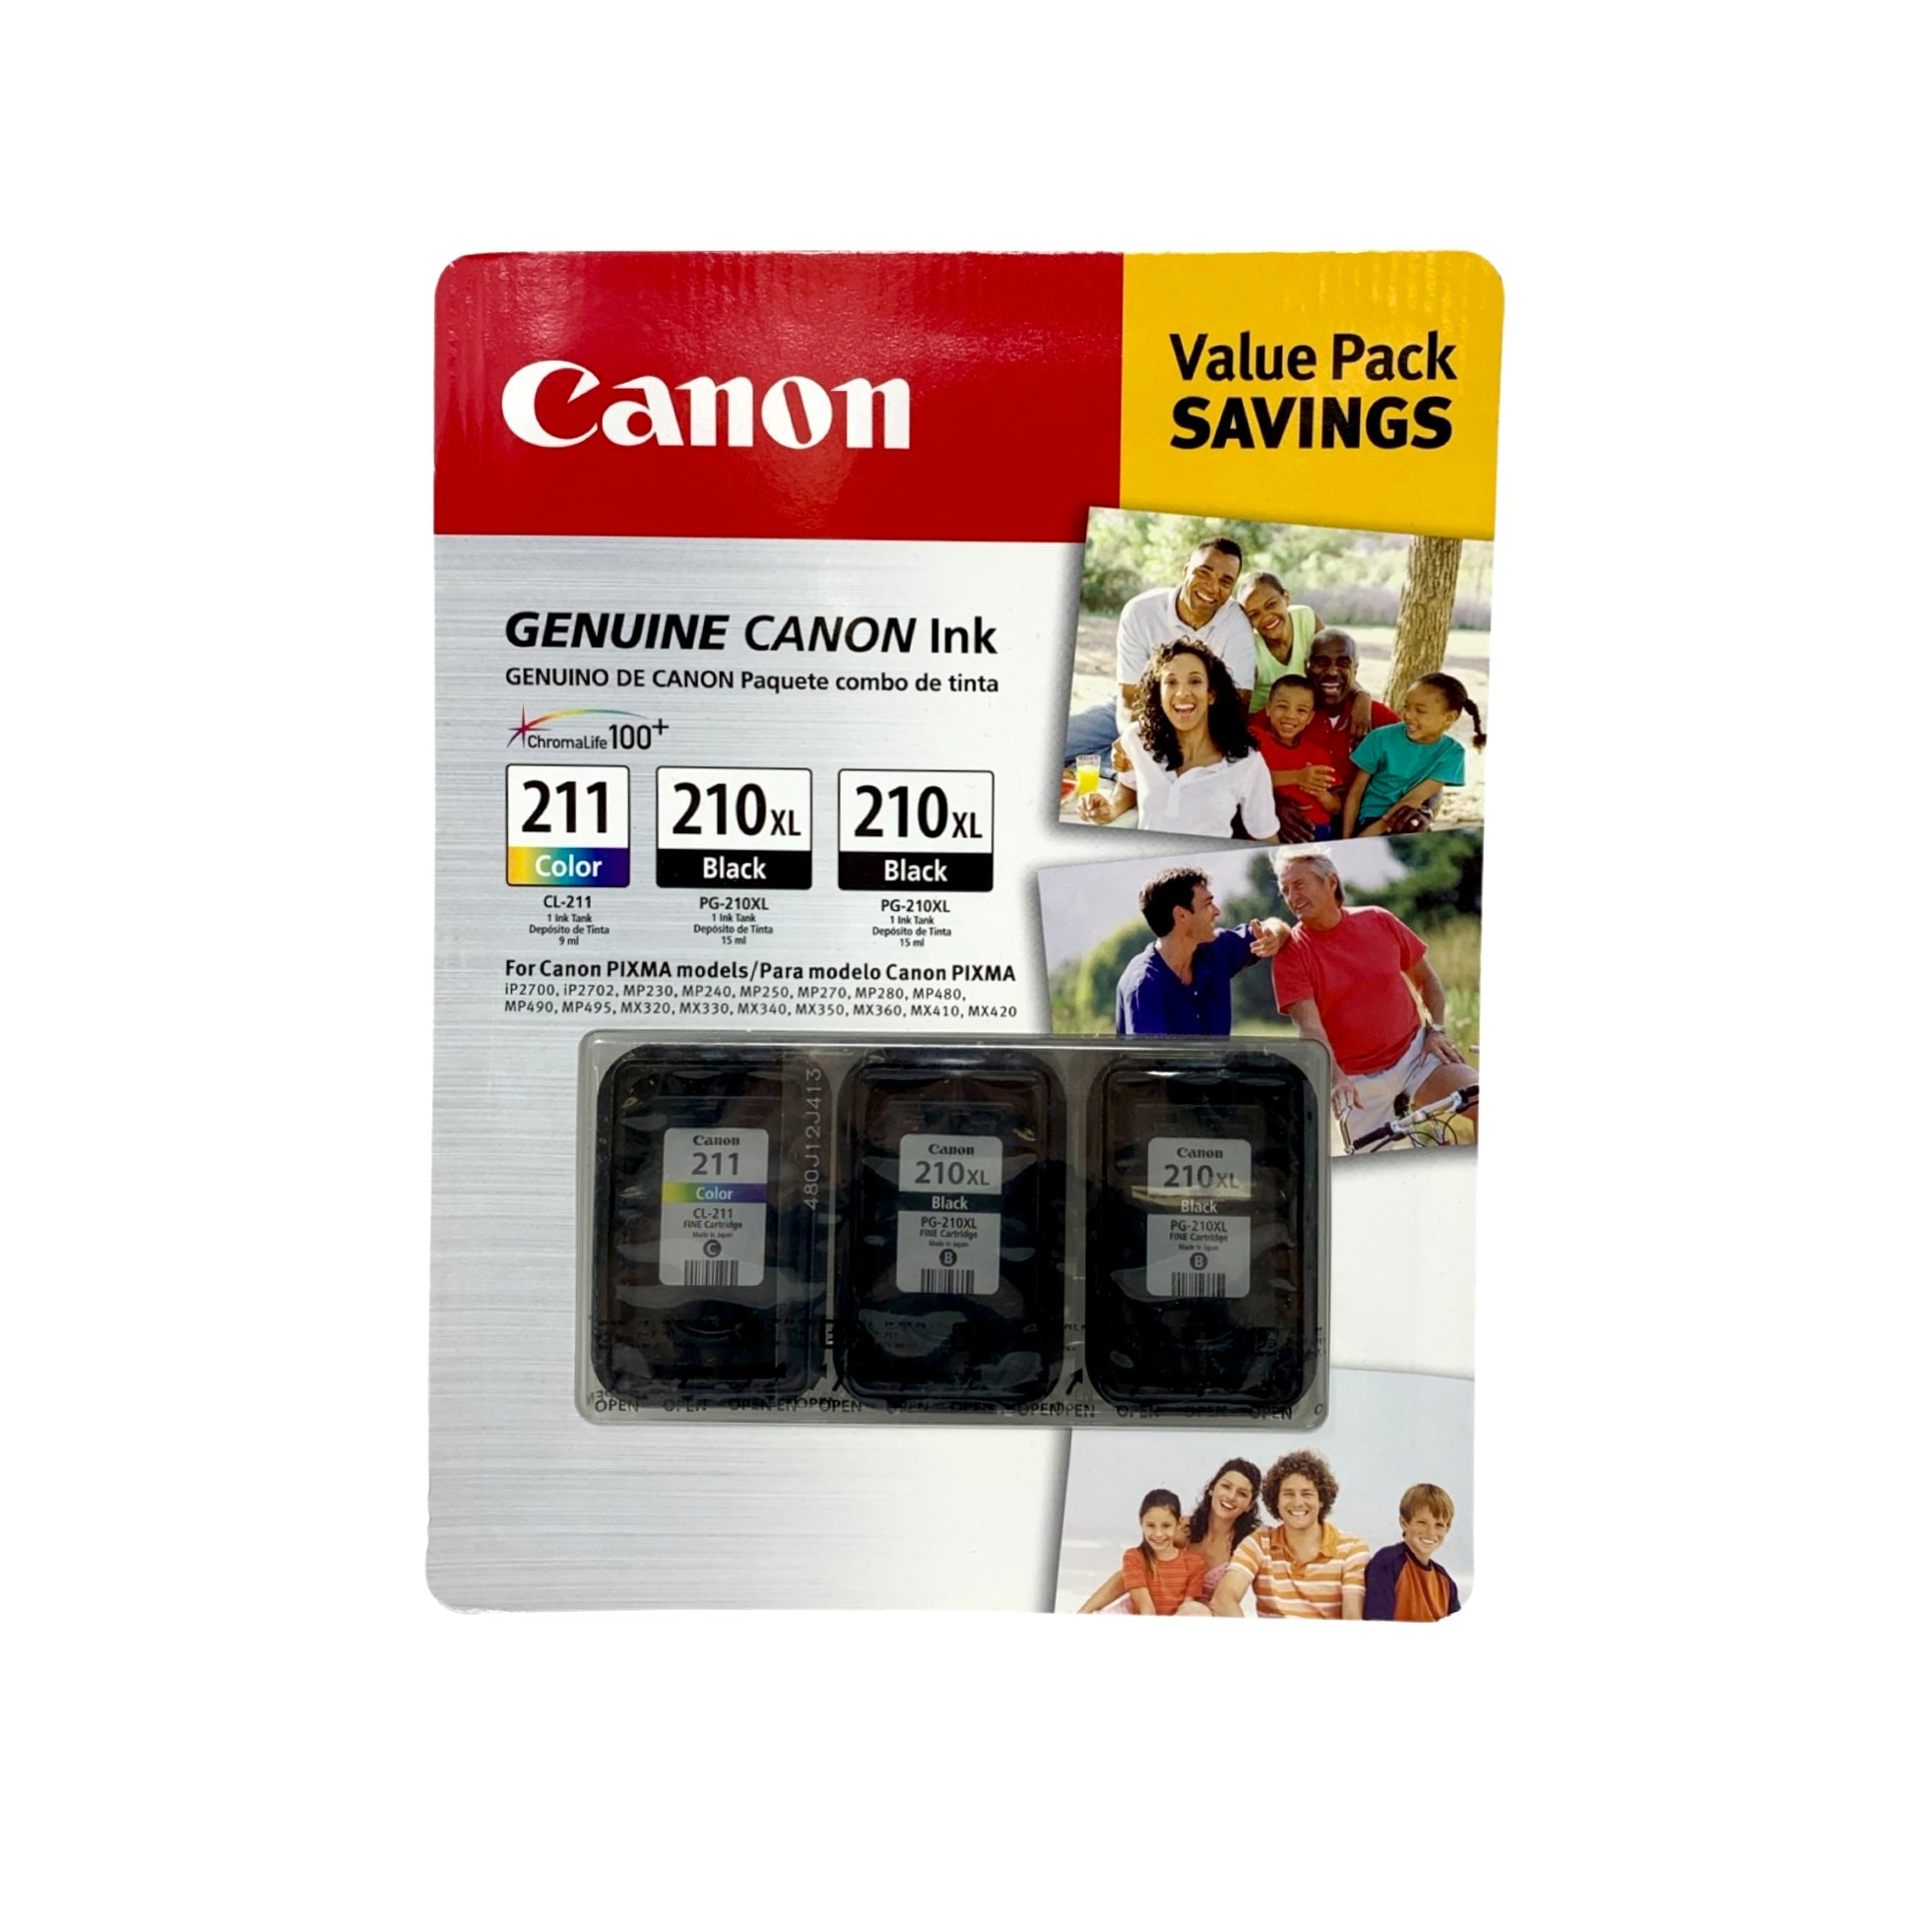 Genuine Canon PG-210XL Black and CL-211 Color Ink Cartridges, 3-Pack